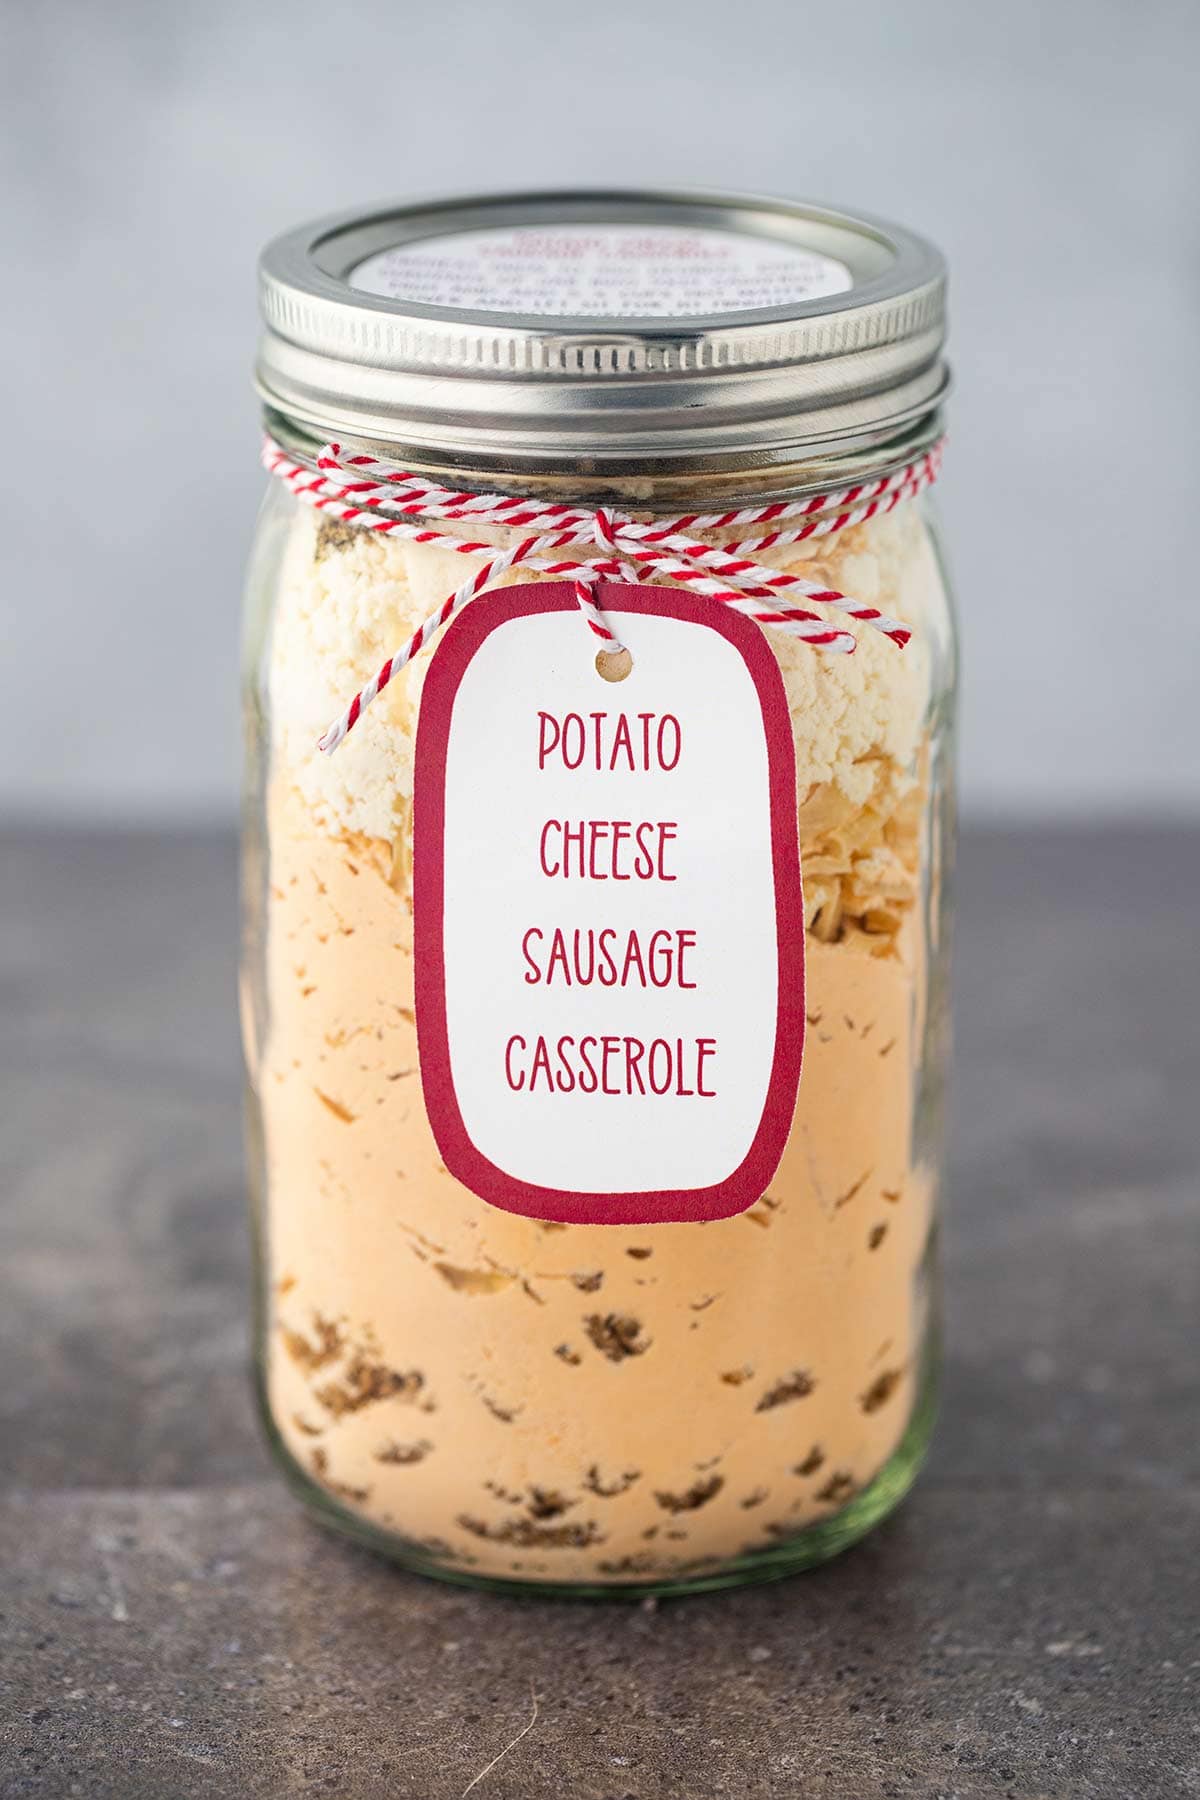 Quart mason jar filled with the dry ingredients to make Potato Cheese Sausage Casserole, sealed and with a printed label tied to the front, with gray background.